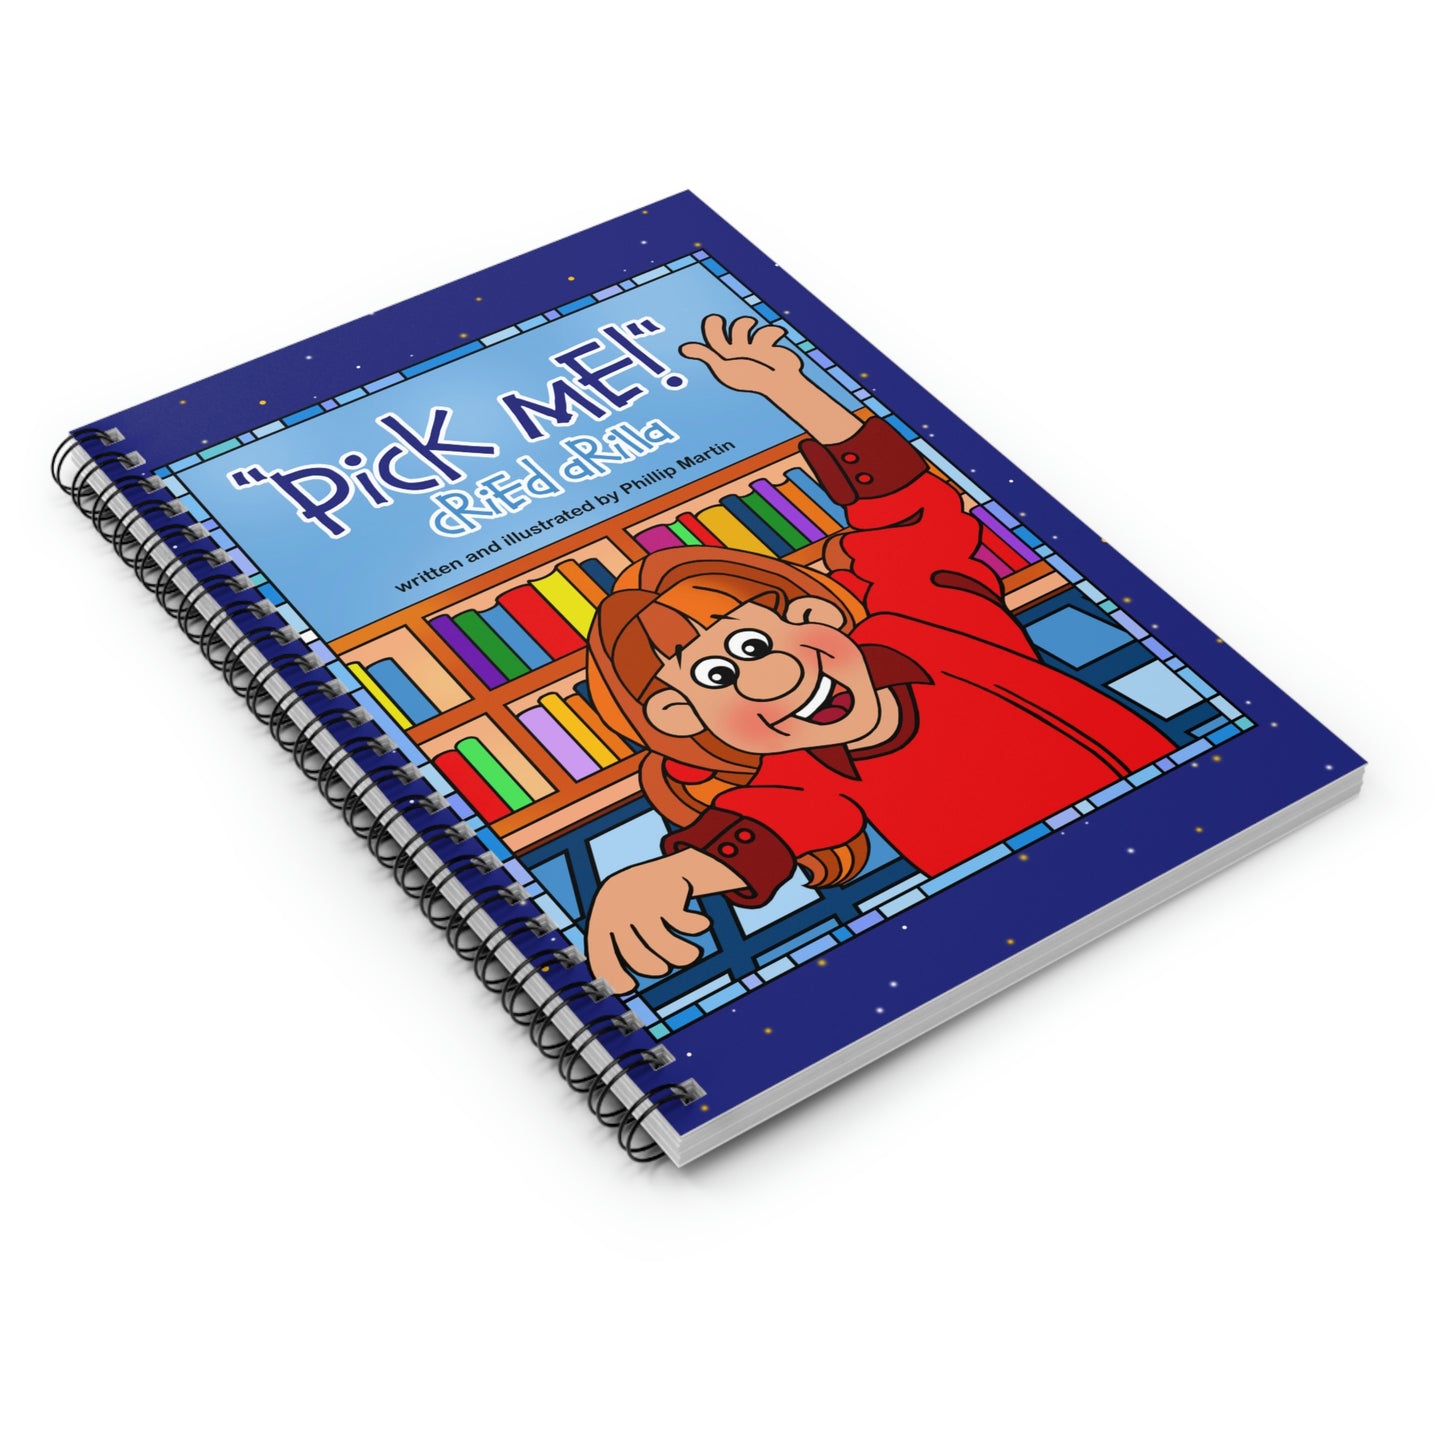 Pick Me Cried Arilla! Spiral Notebook - Ruled Line